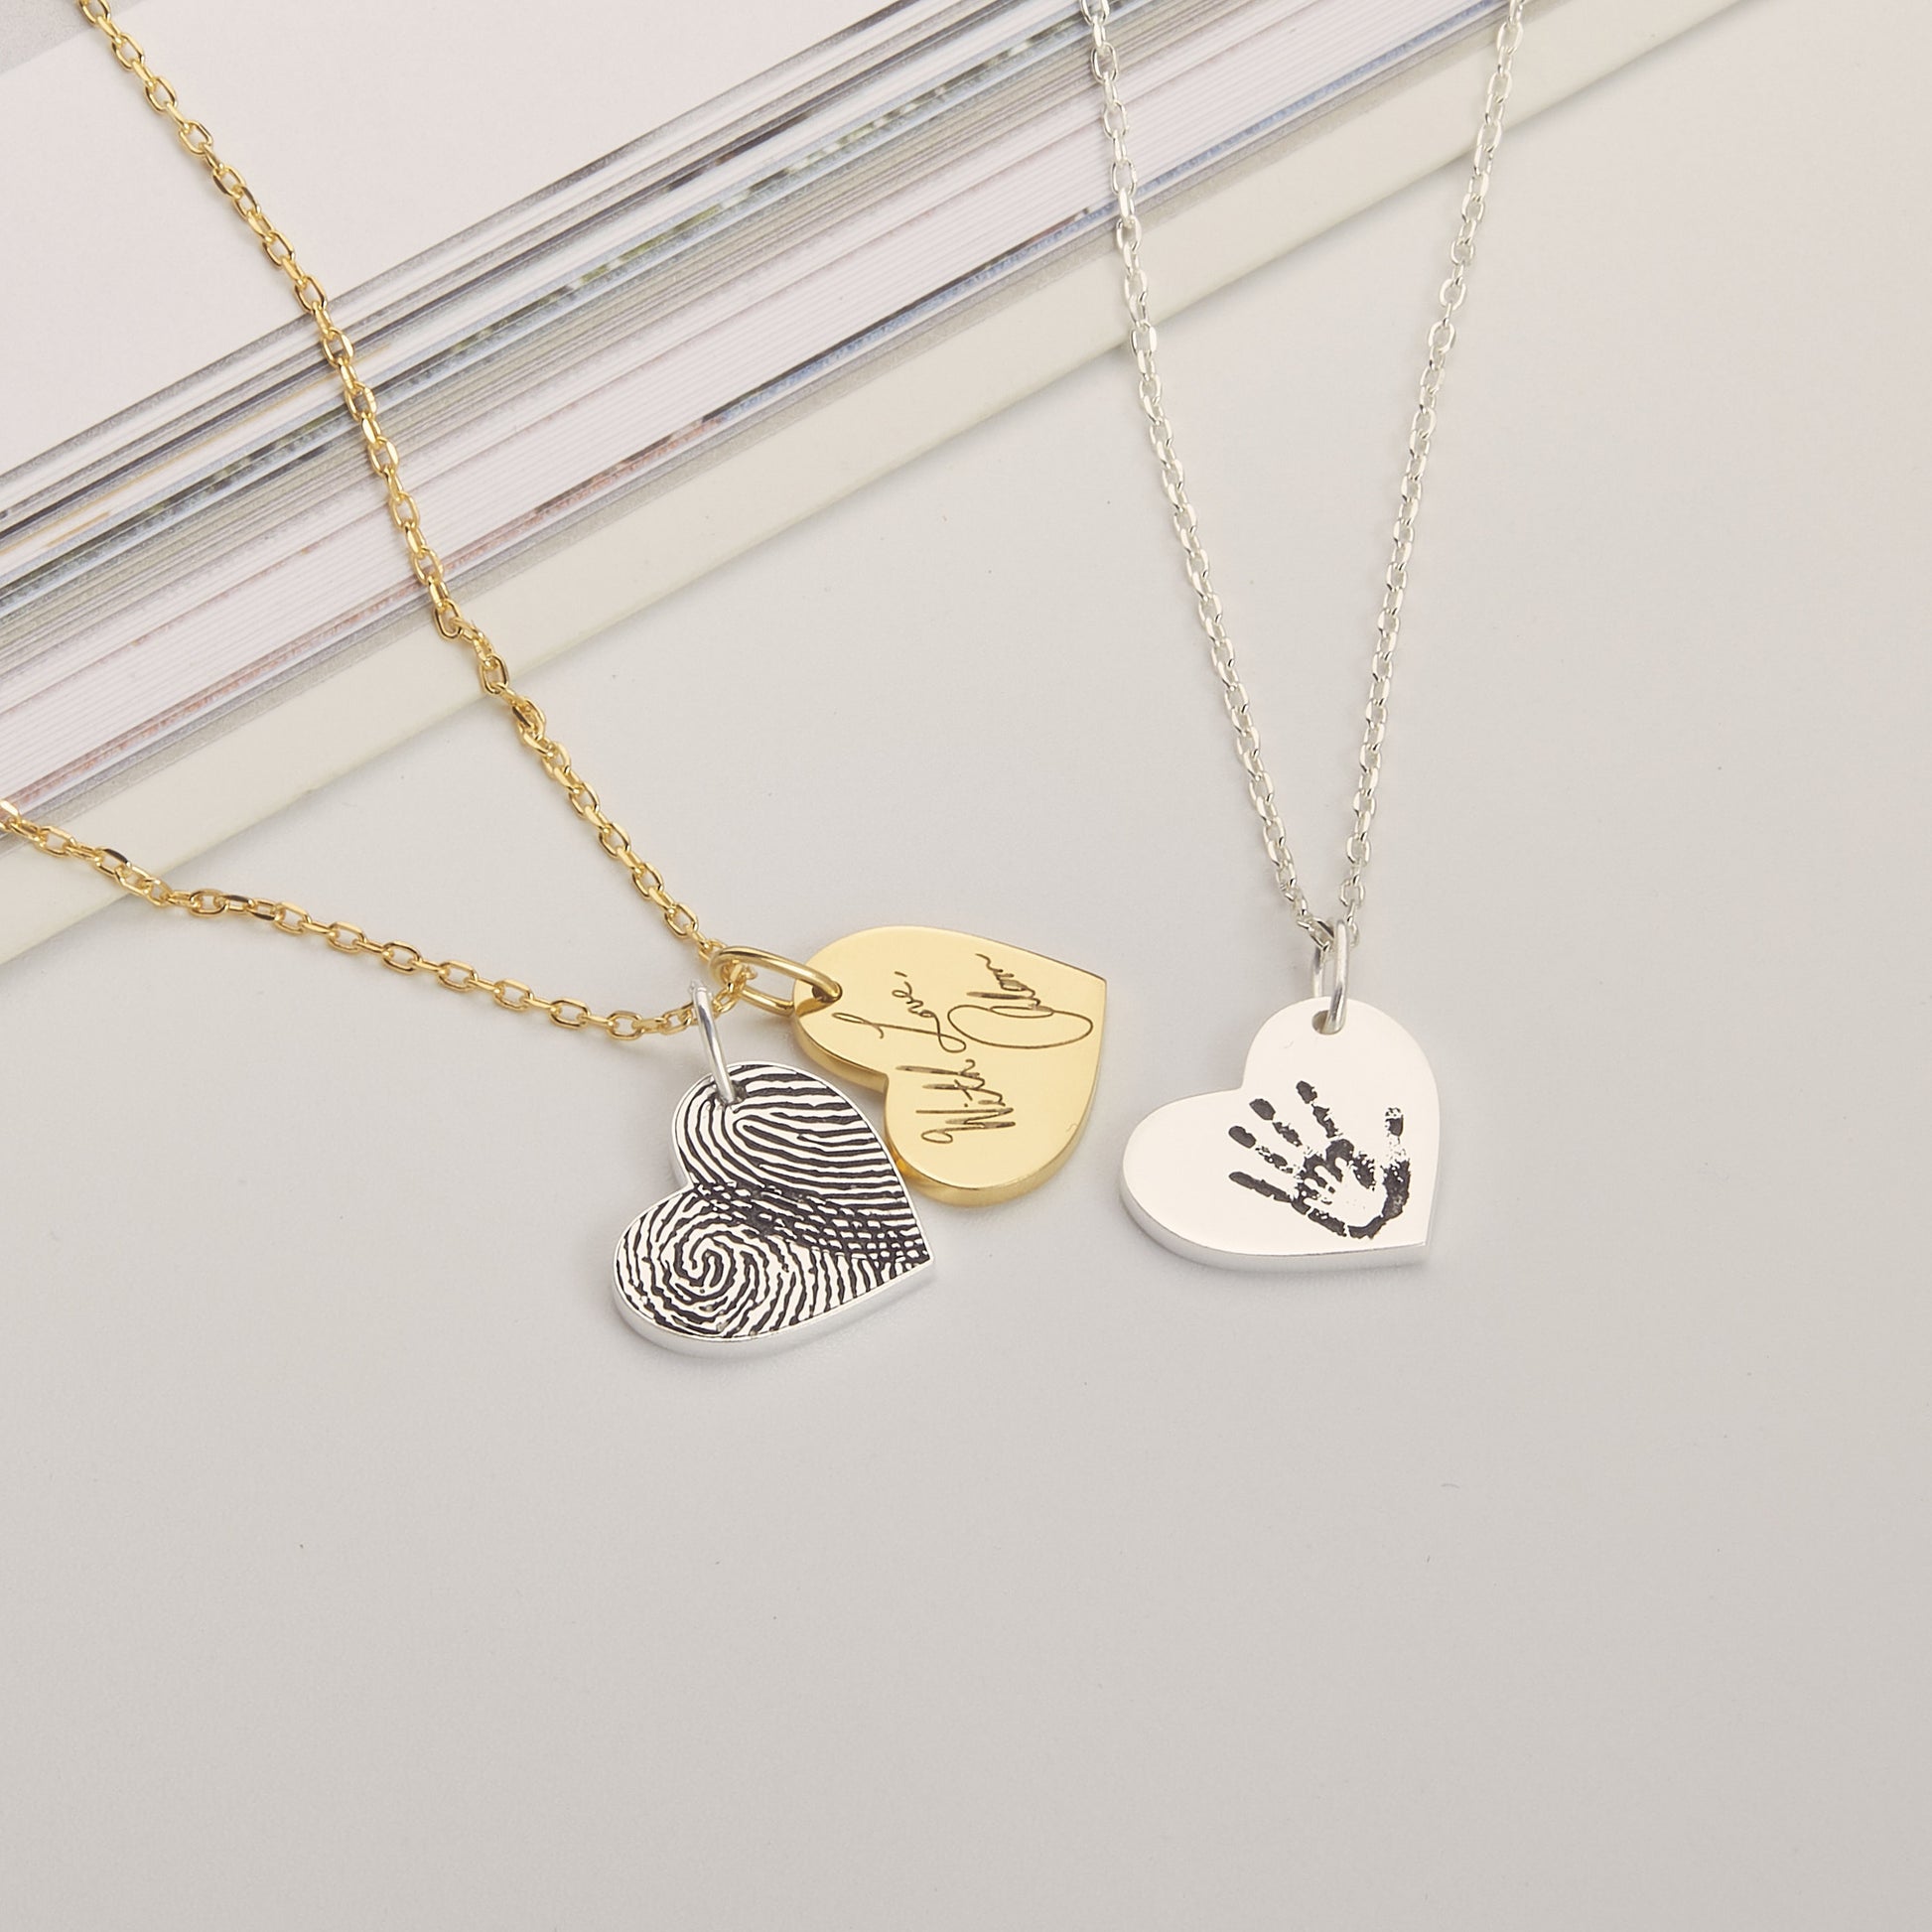 Valentine Gift for her | Signature necklace | Remembrance necklace | Fingerprint Heart Necklace | Handwriting Necklace | Memorial Necklace